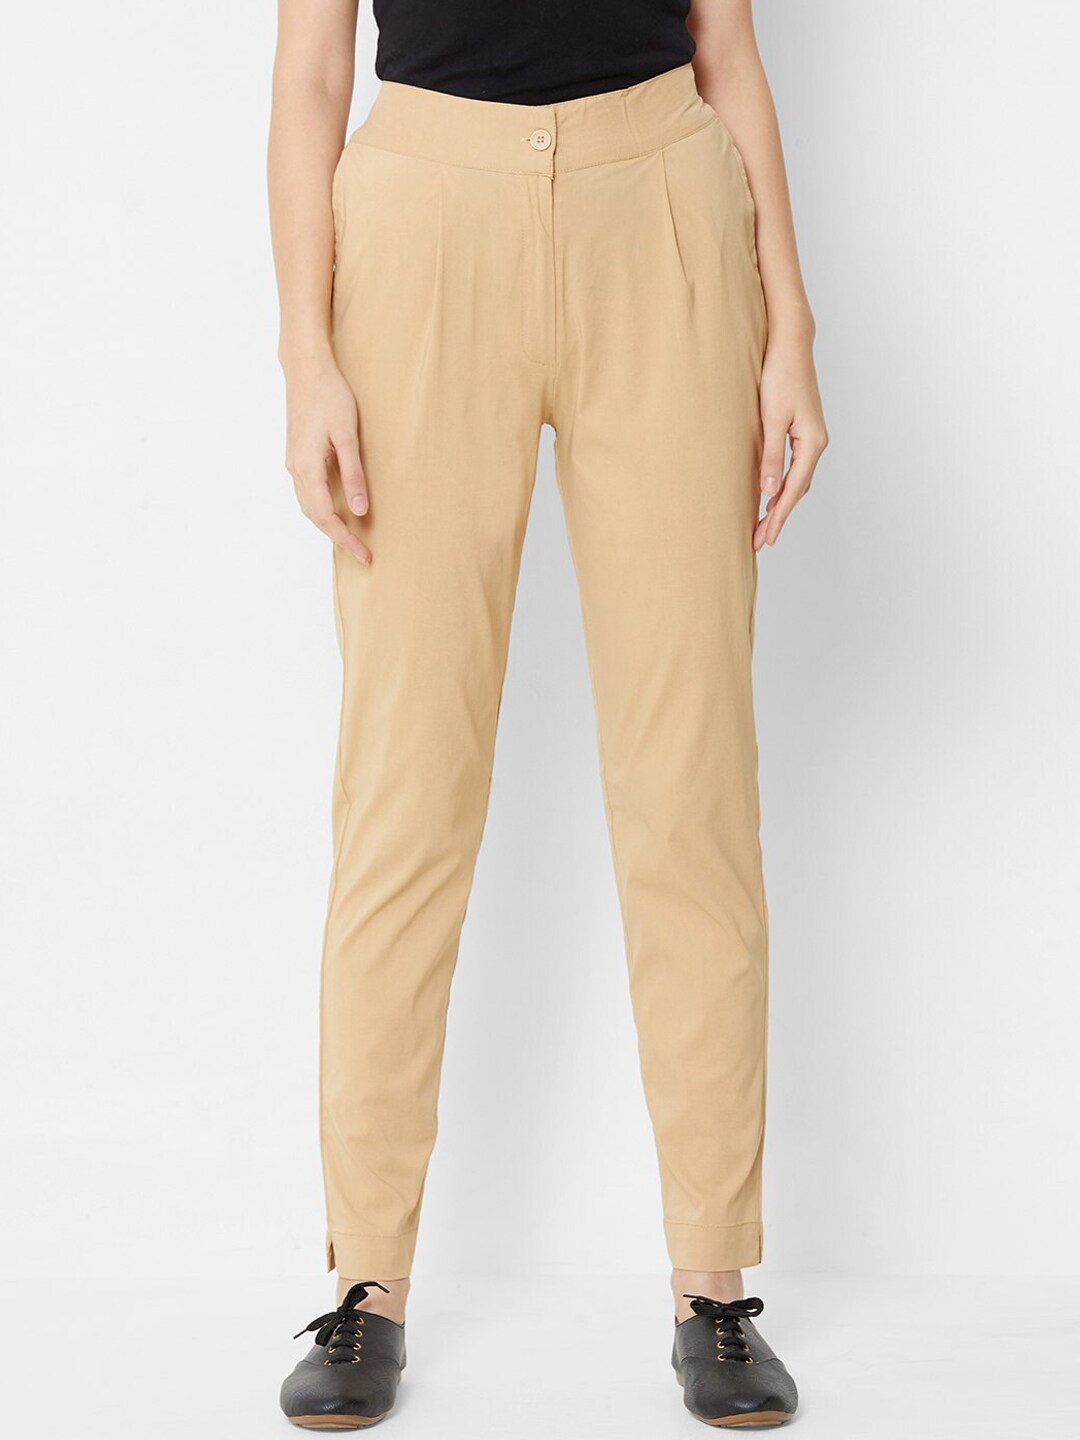 ZOLA Women Beige Straight Fit Regular Trousers Price in India